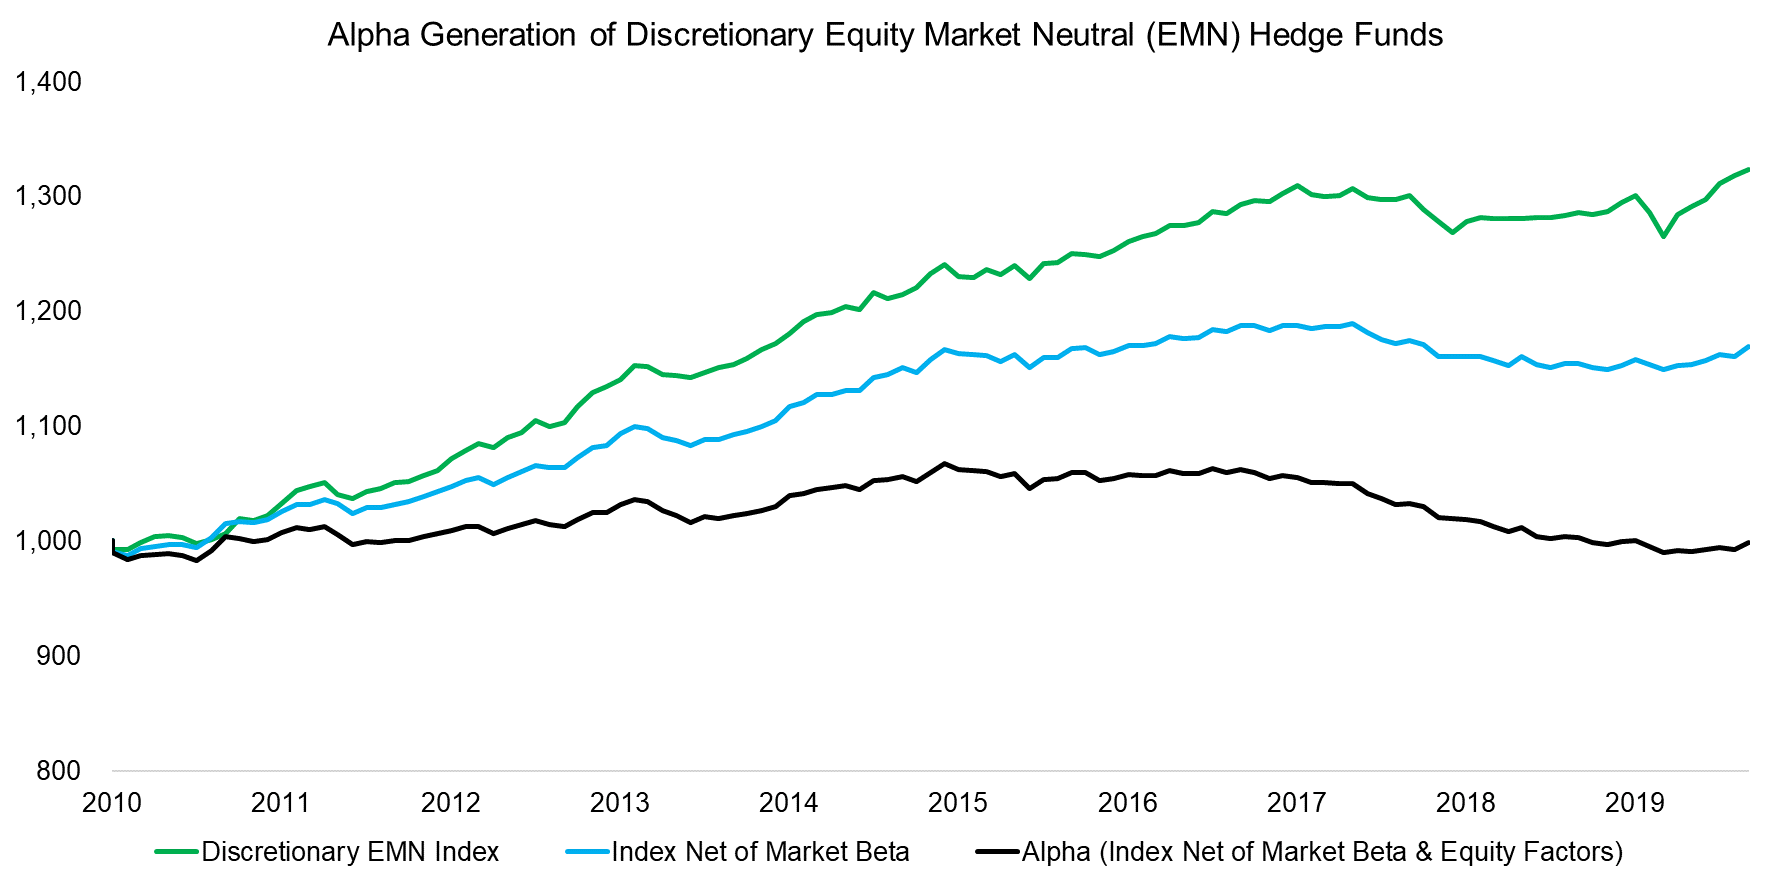 Alpha Generation of Discretionary Equity Market Neutral (EMN) Hedge Funds